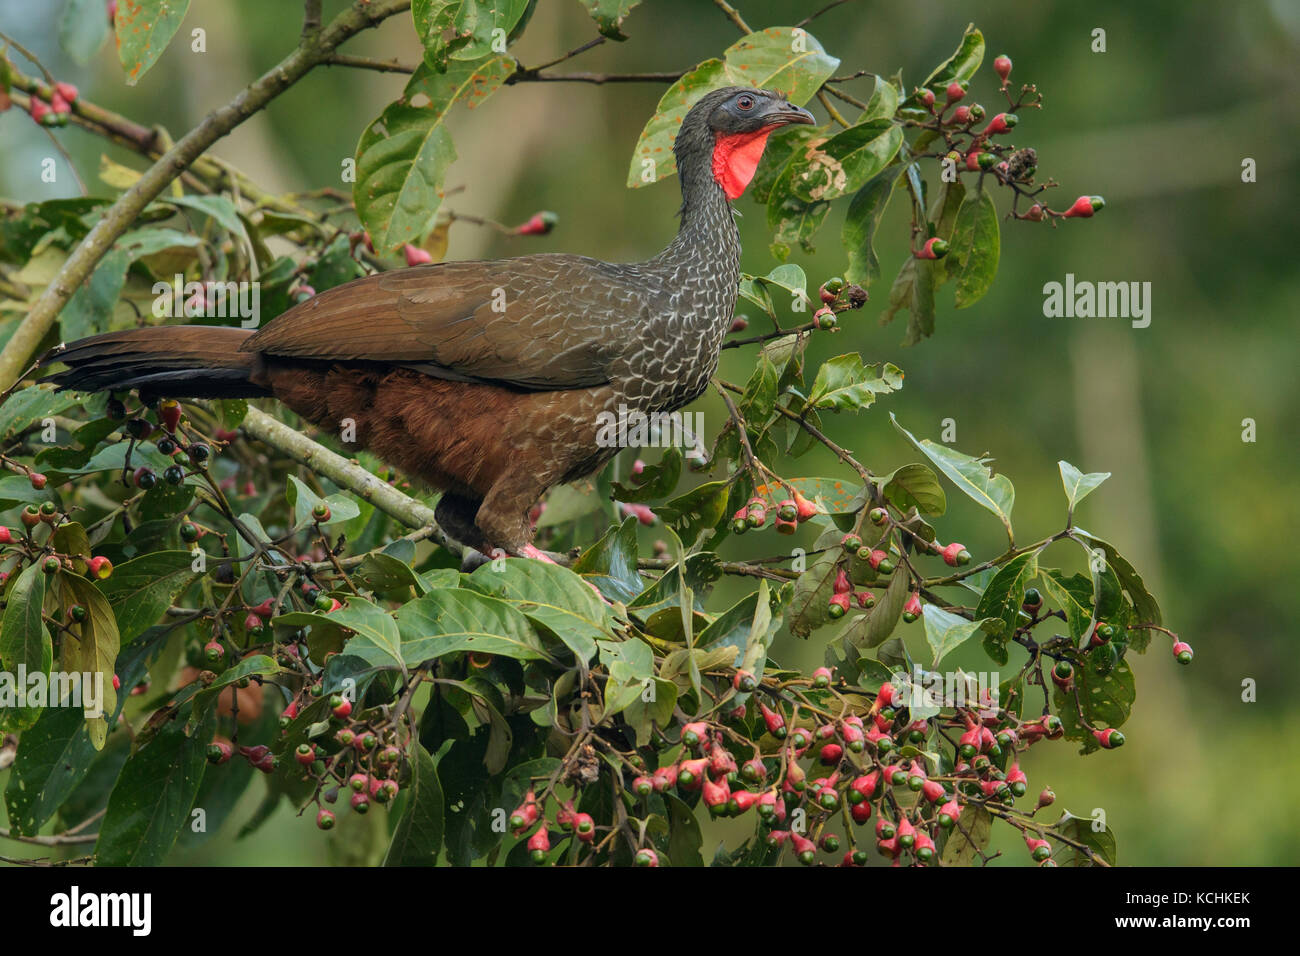 Cauca Guan (Penelope perspicax)  perched on a branch in the mountains of Colombia, South America. Stock Photo